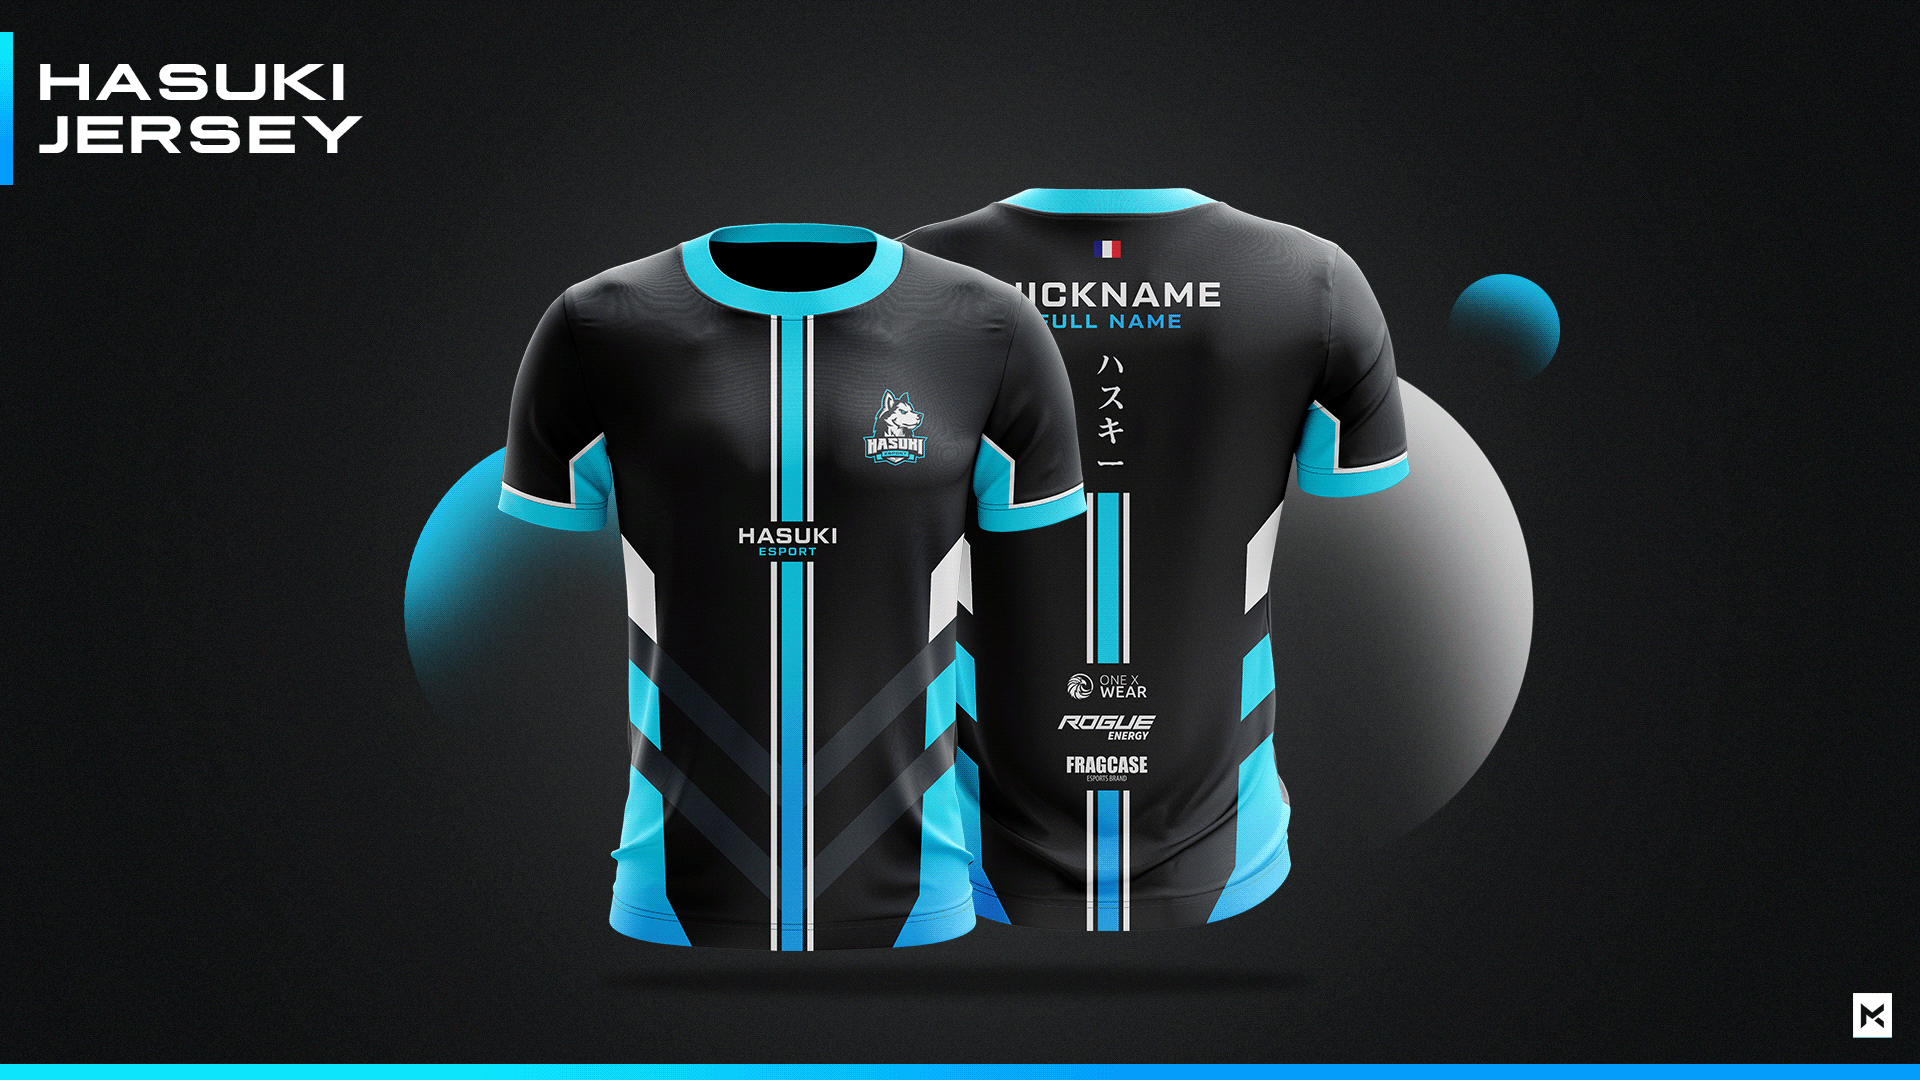 Free Download Mockup Jersey Esport Psd | Download Free and Premium PSD